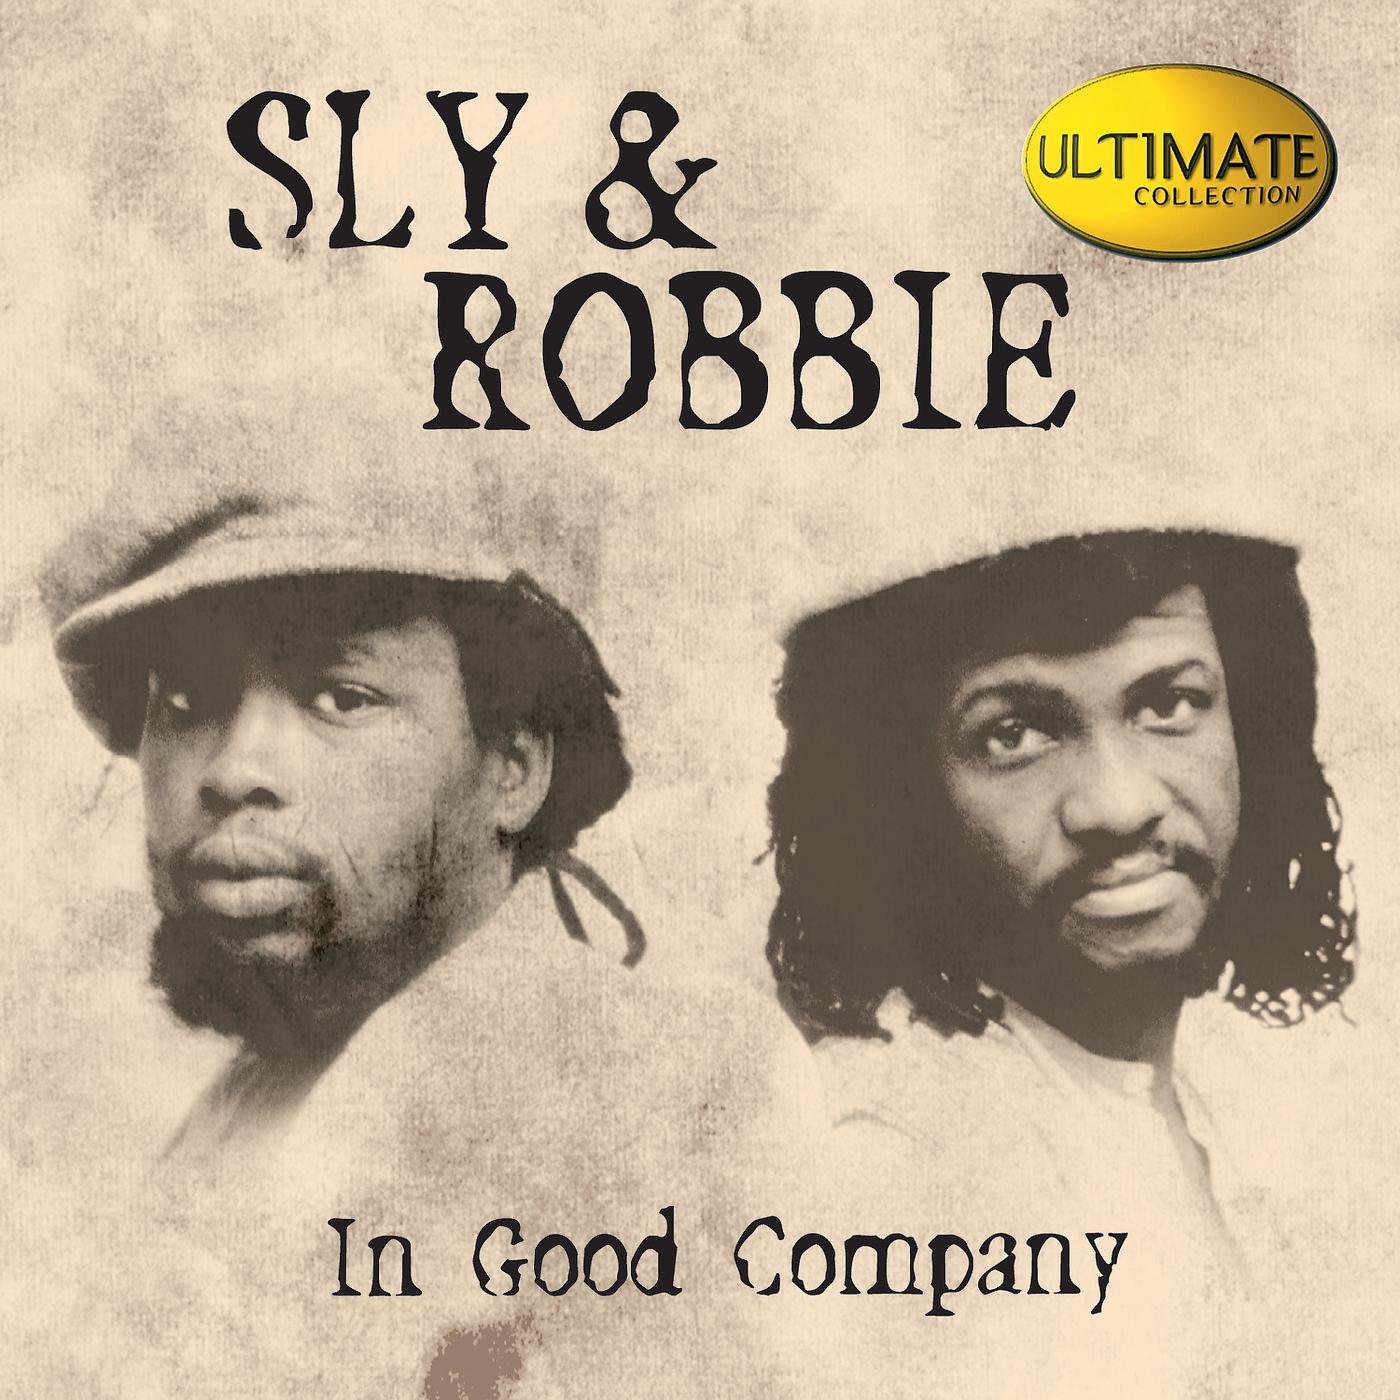 Постер альбома Sly & Robbie Ultimate Collection: In Good Company